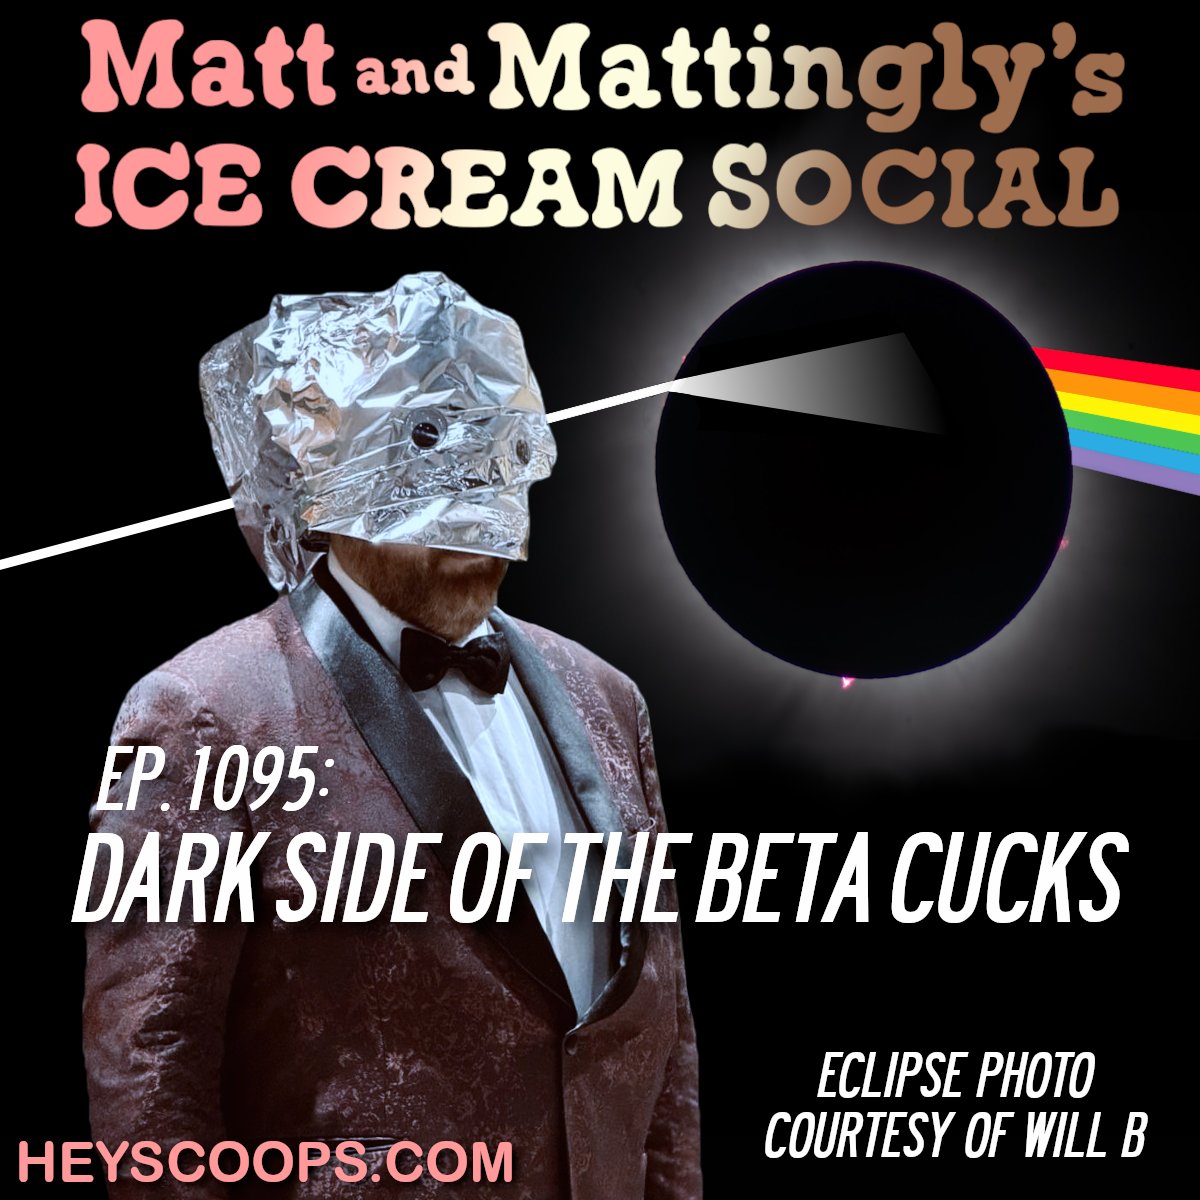 States apart, but all three hosts take in the solar eek-lips! Matt discovers how little he knows about bear bags. Jacob finds a moment of restraint on a flight. Paul recounts the cinematic wonder that was Evel Kneivel. Find Episode 1095: Dark Side of the Beta Cucks at…